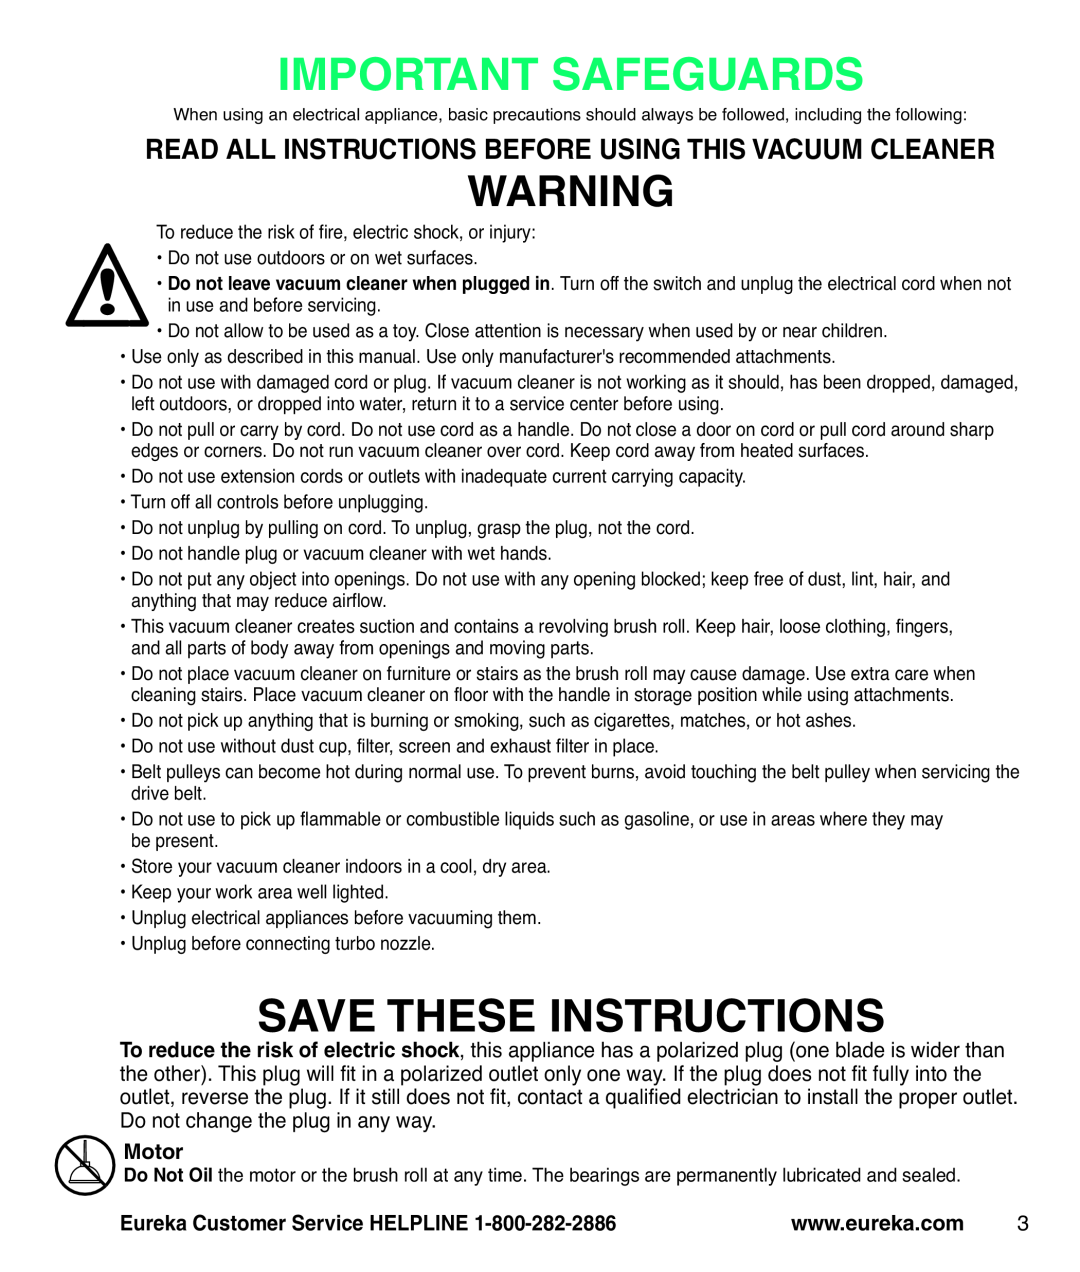 Eureka AS3100 manual Read All Instructions Before Using This Vacuum Cleaner, Important Safeguards, Save These Instructions 